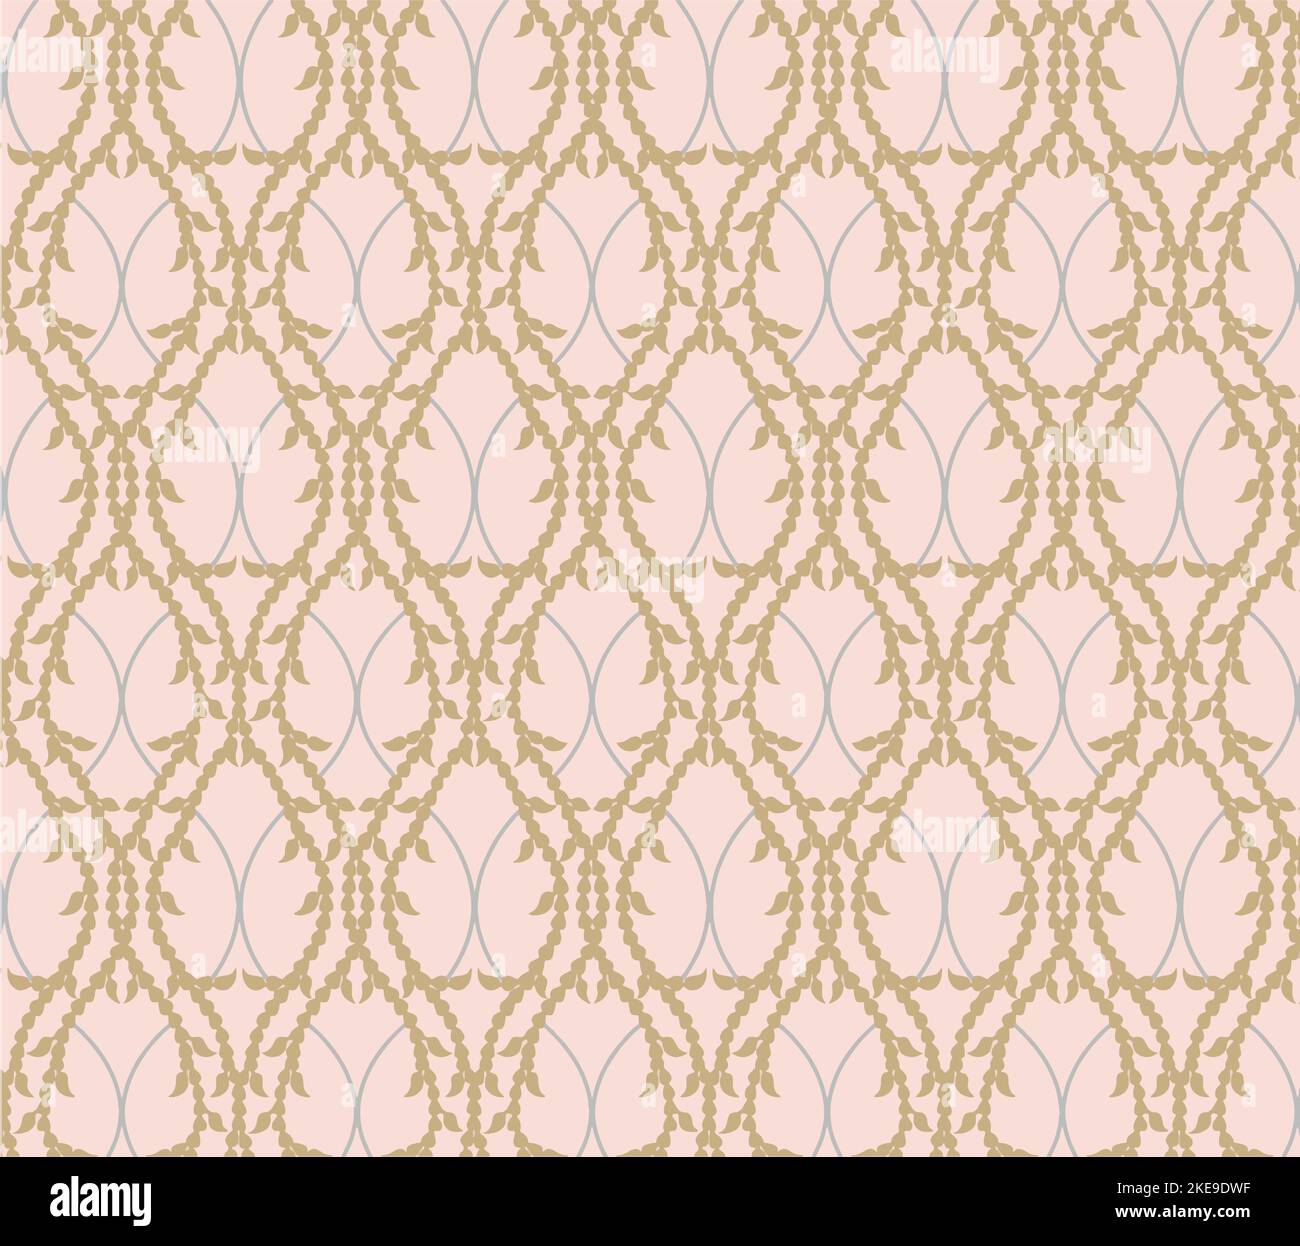 Pink and white damask vector seamless pattern. Vintage, paisley elements. Traditional, Turkish motifs. Great for fabric and textile, wallpaper, and packaging. Stock Vector